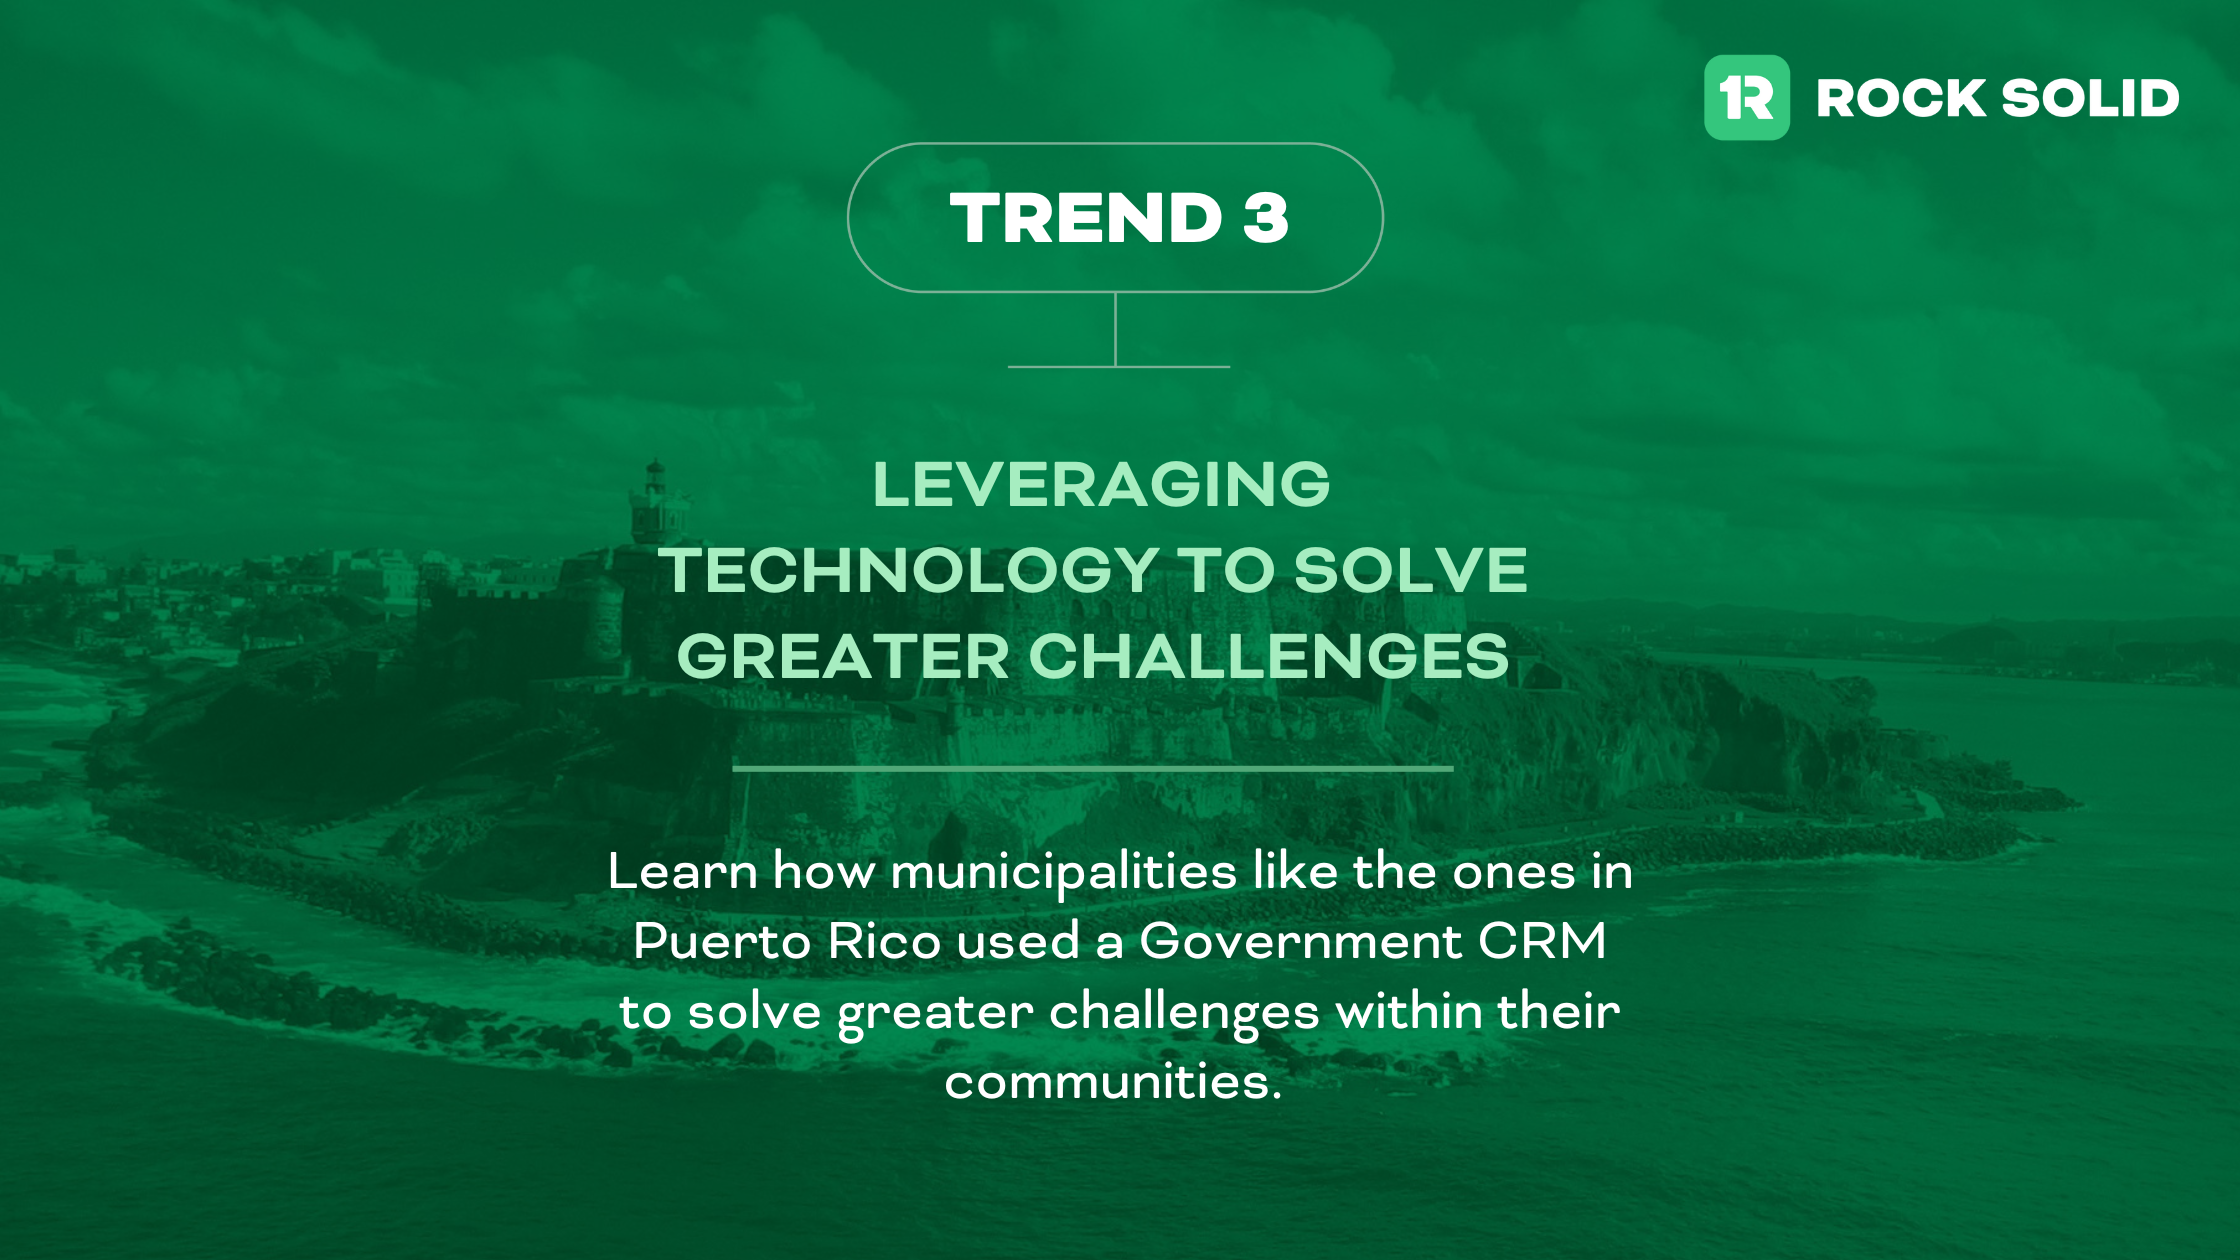 Trend 3: Leveraging Technology to Solve Greater Challenges